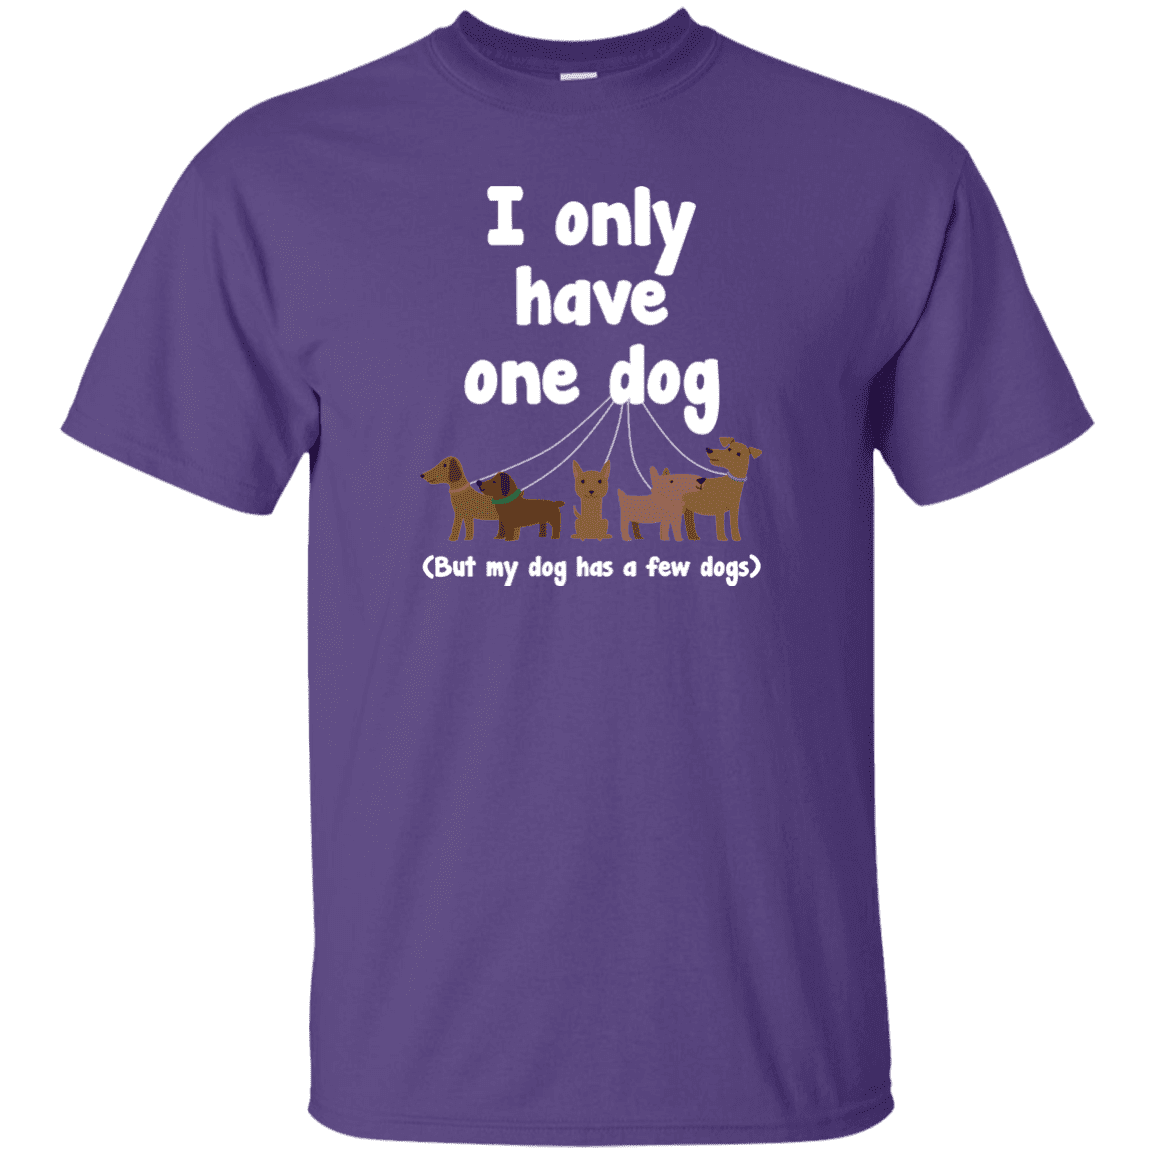 I Only Have 1 Dog - T Shirt.